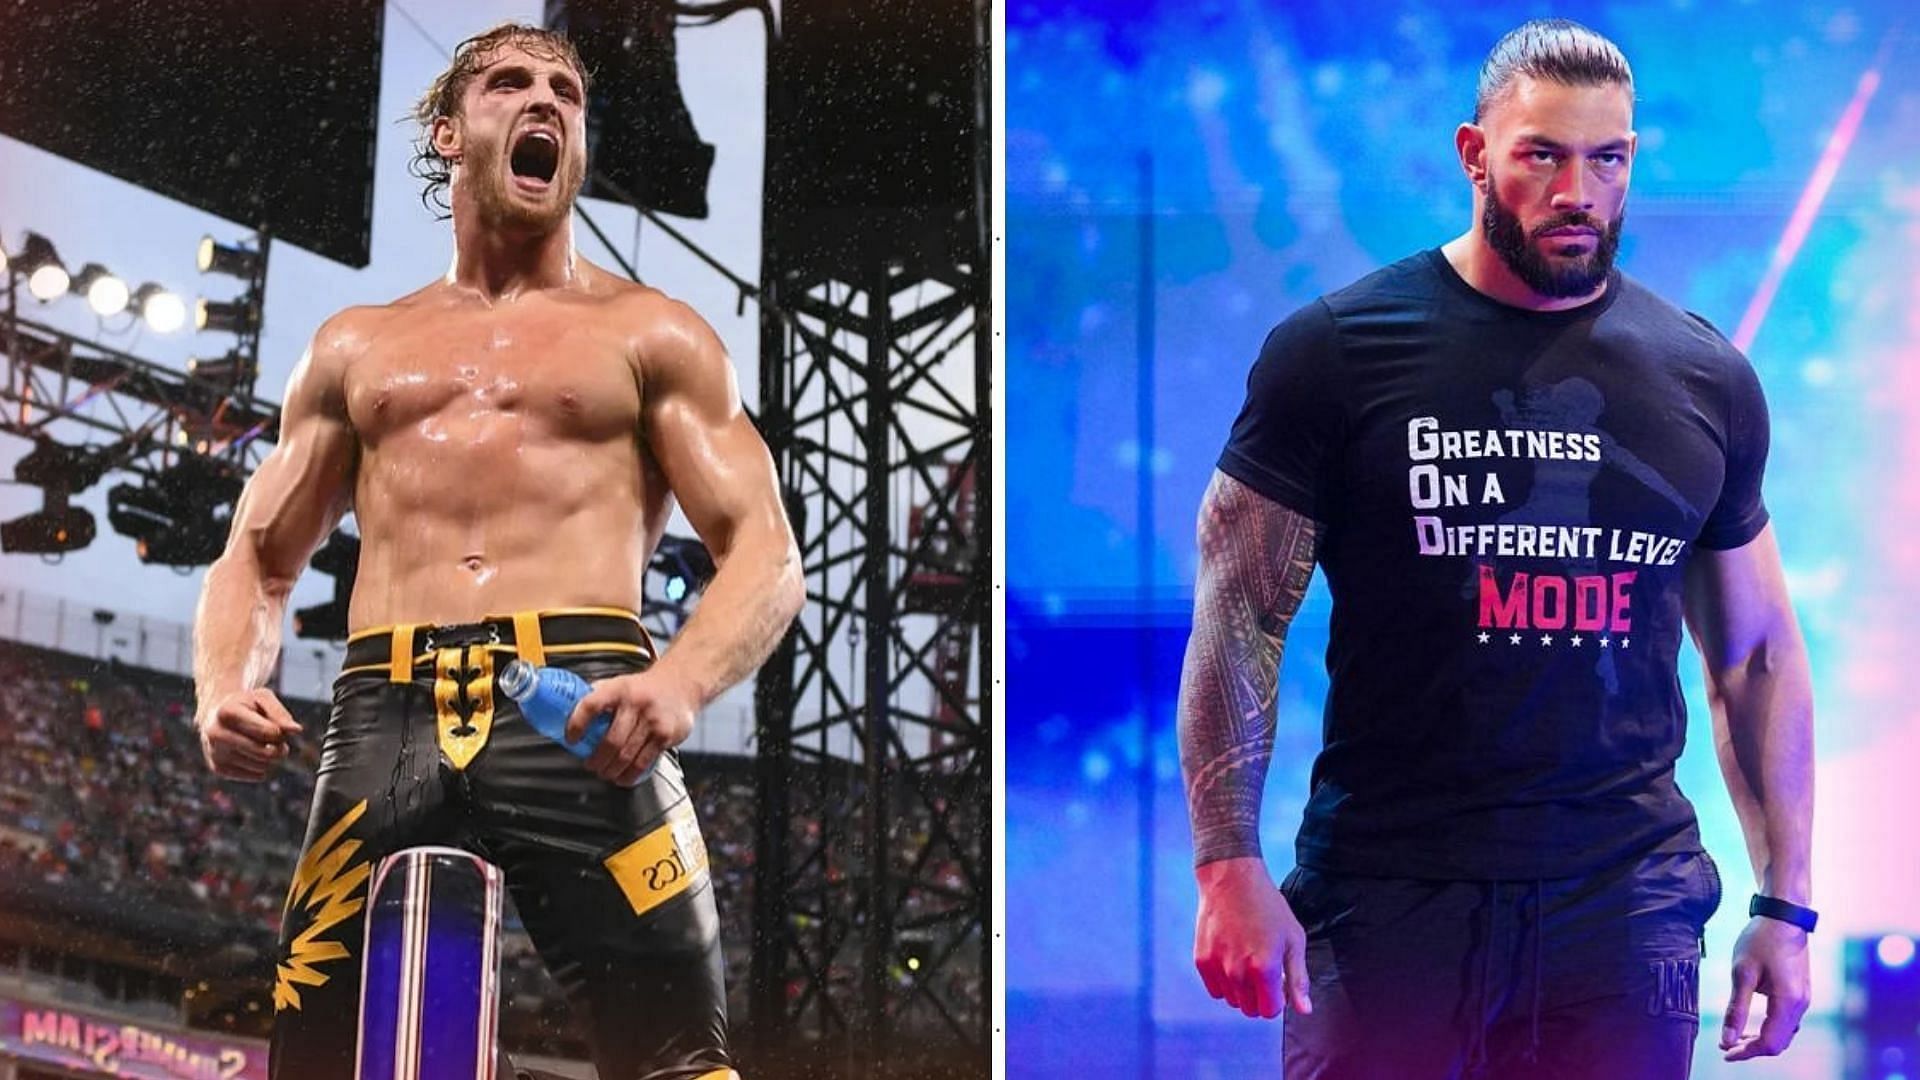 Logan Paul and Roman Reigns will meet at a WWE press conference on September 17.